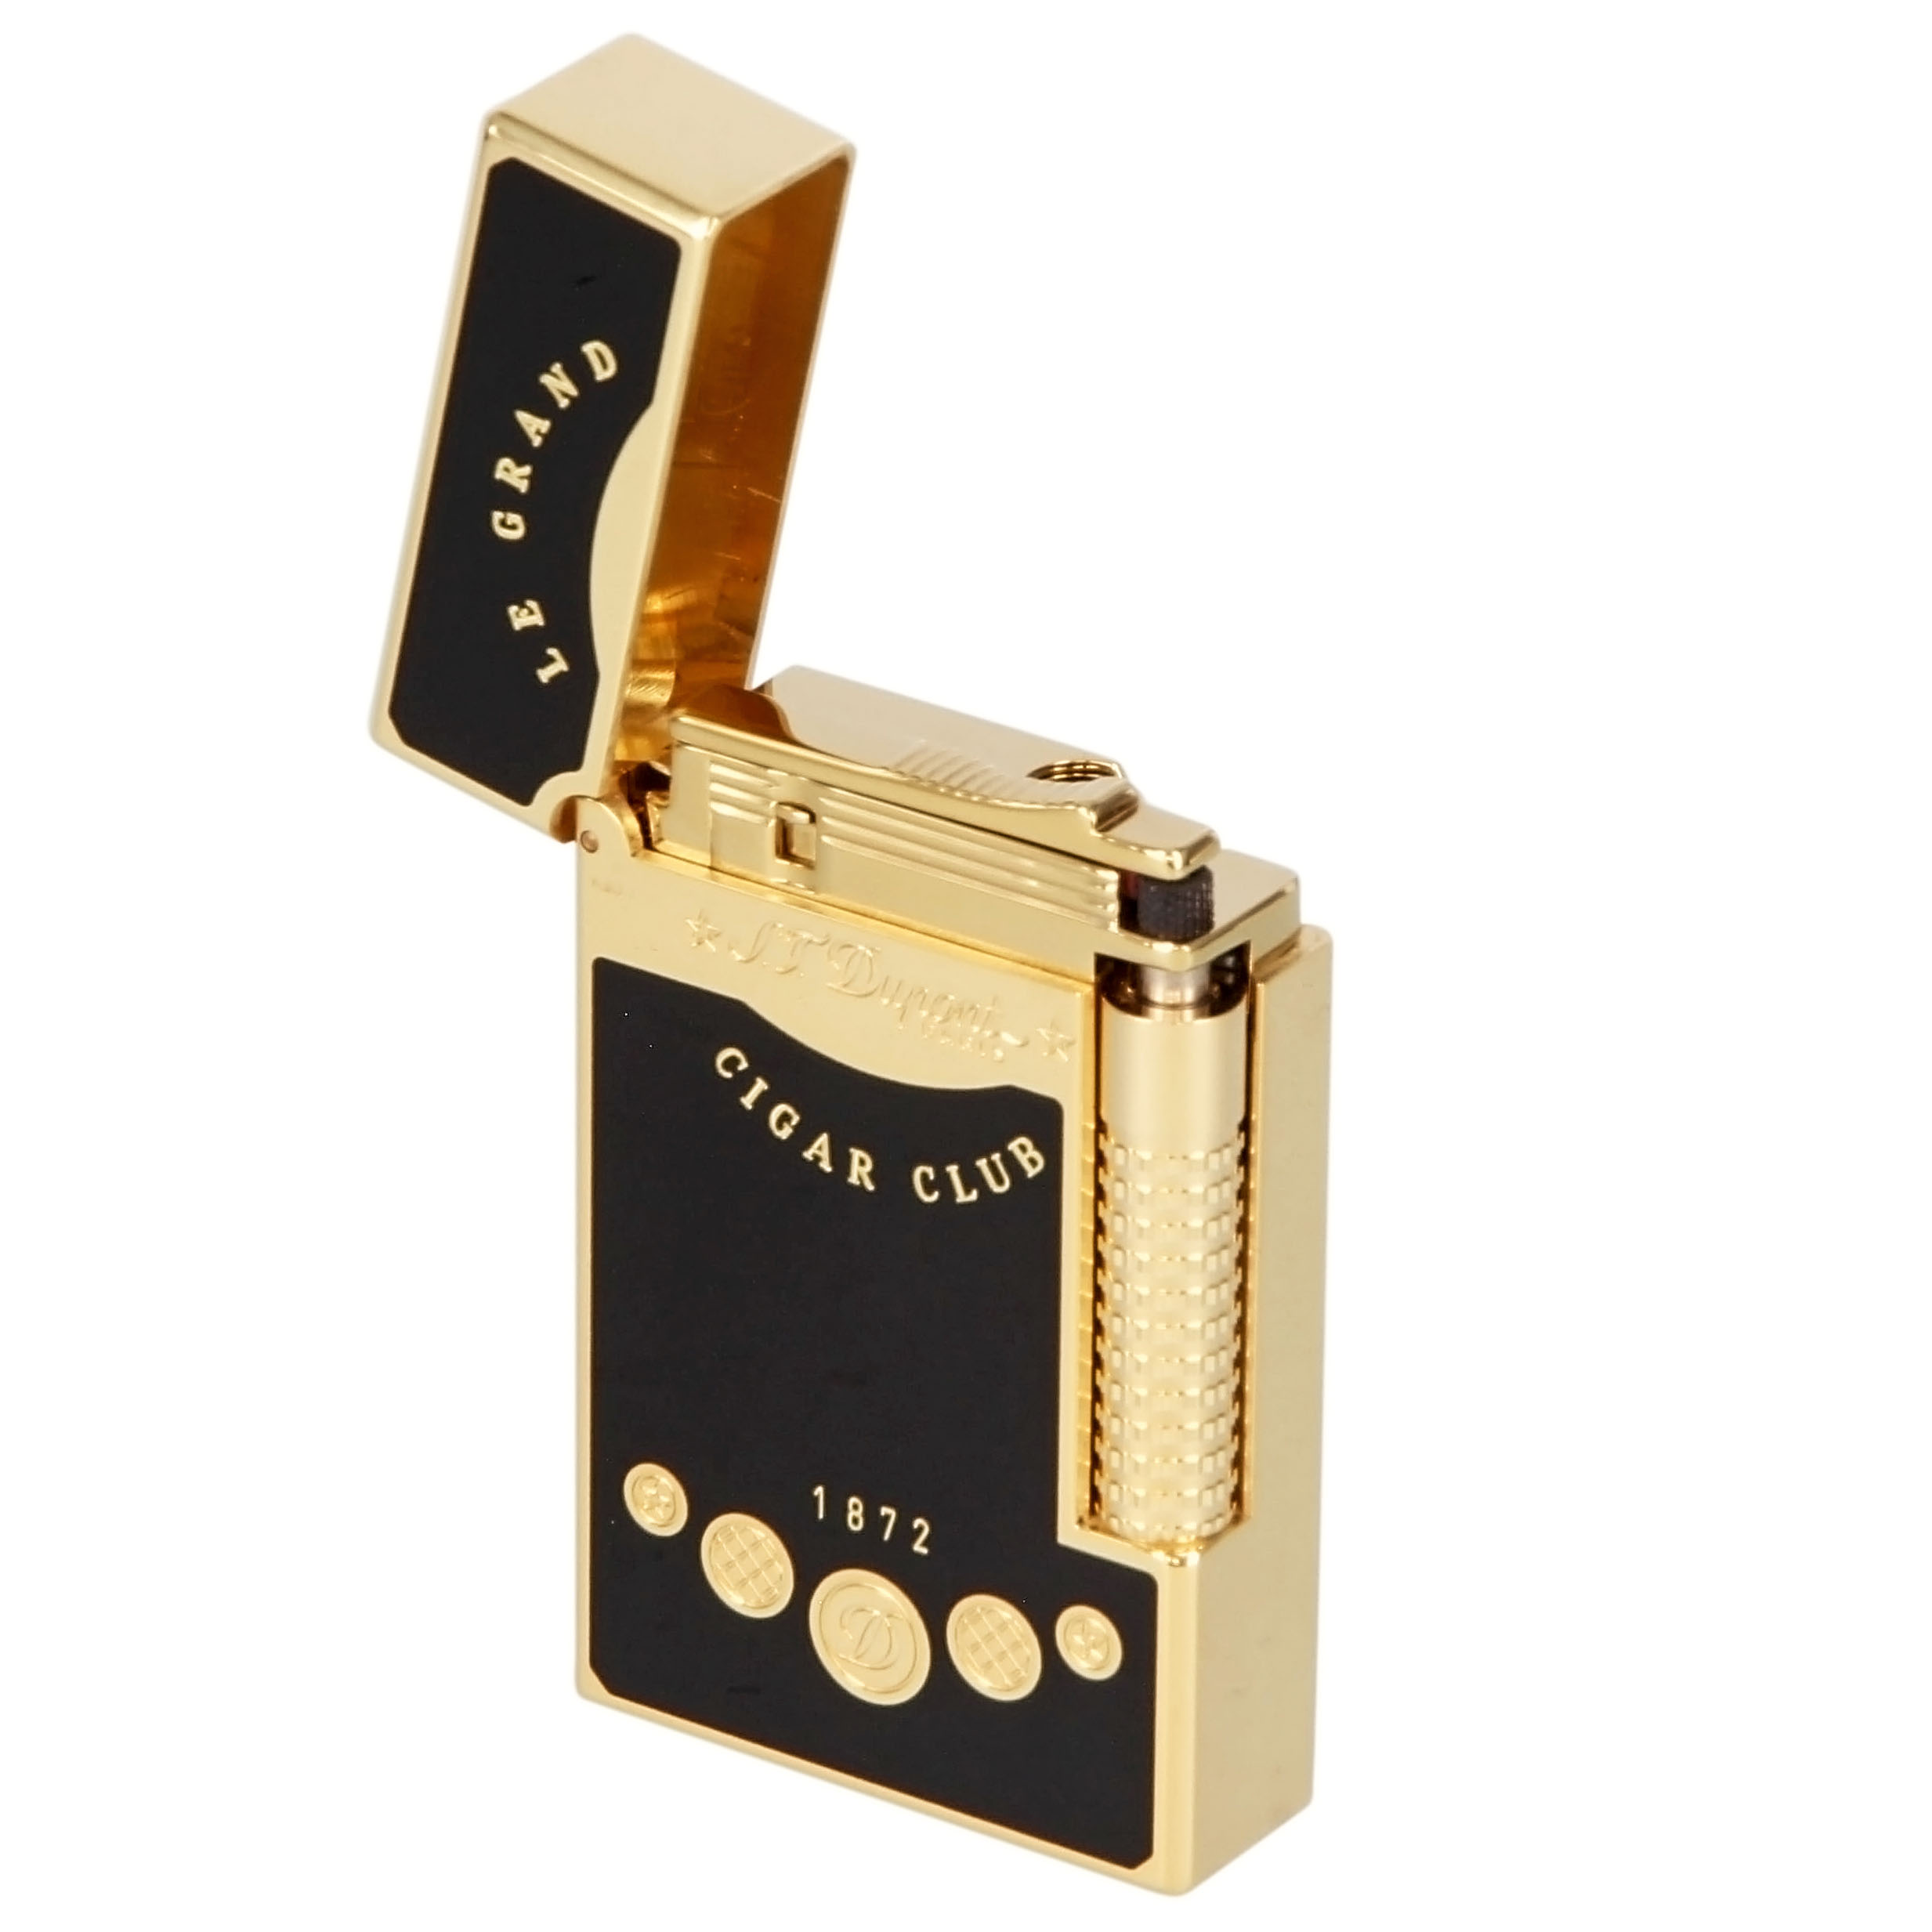 S.T. Dupont Le Grand Cigar Club Lighter